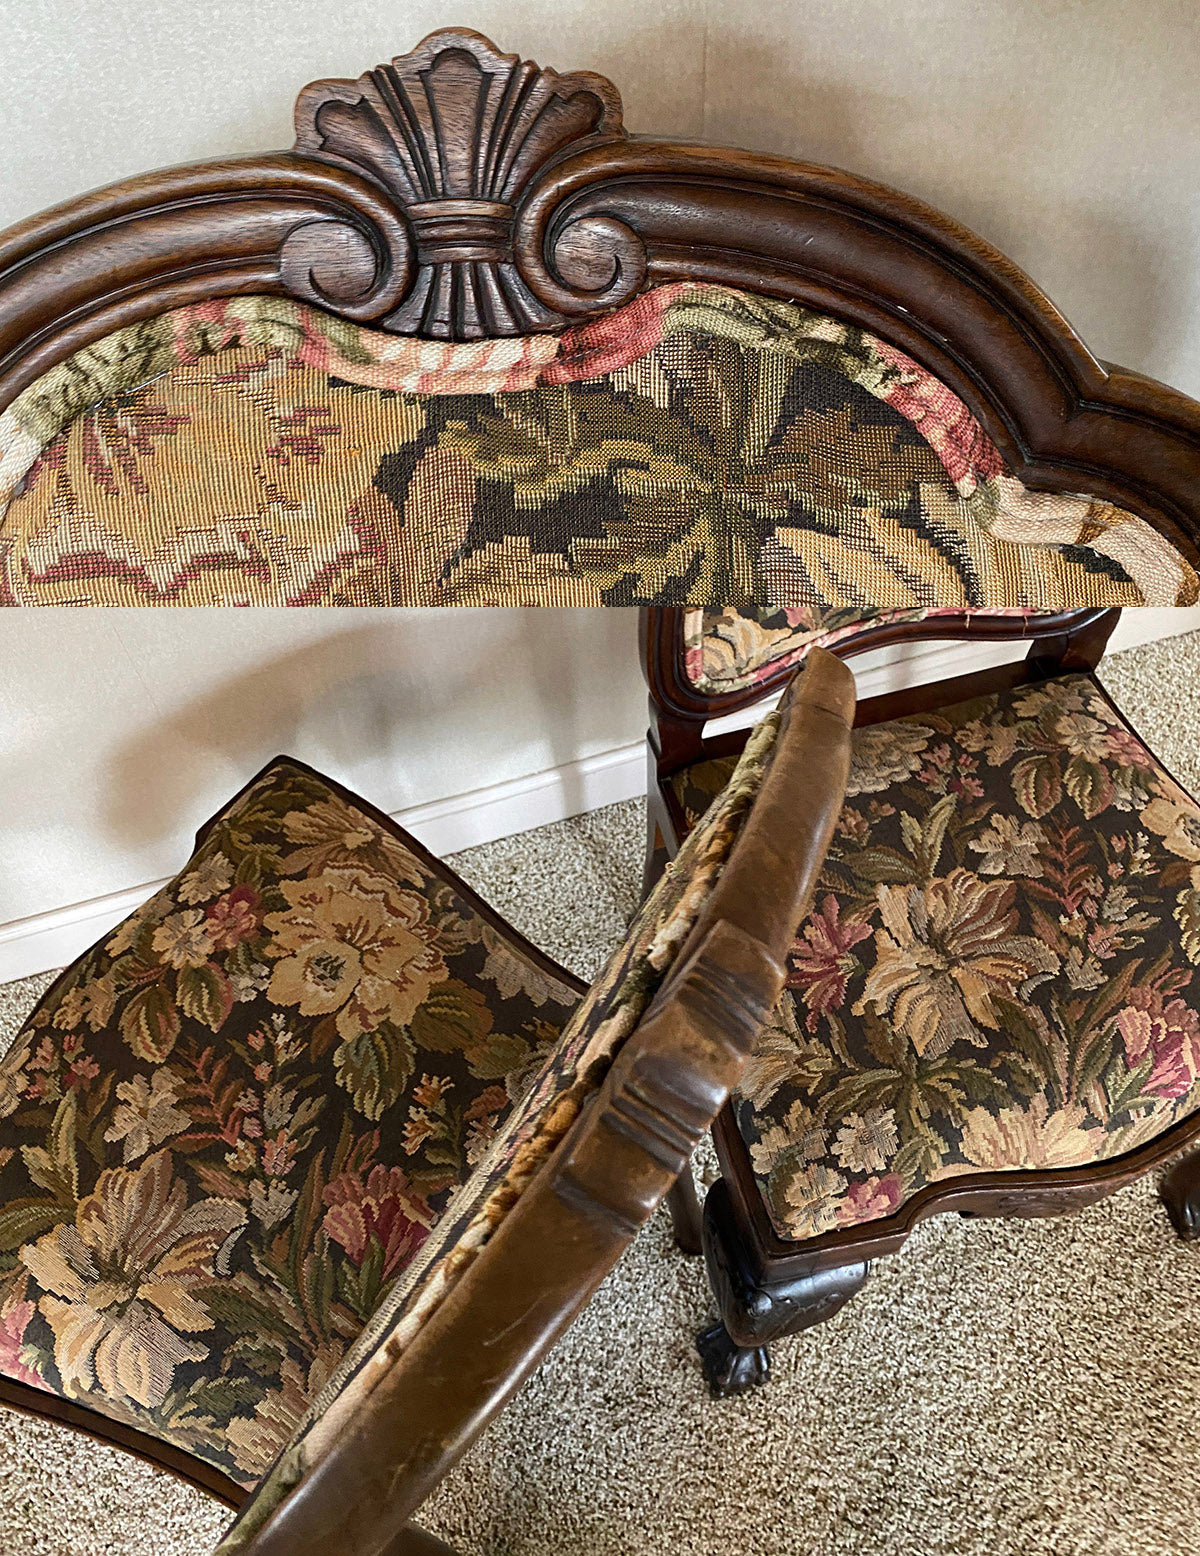 Pair of Antique c. 1860s (Napoleon III era) French Claw Foot Side Chairs, Upholstered